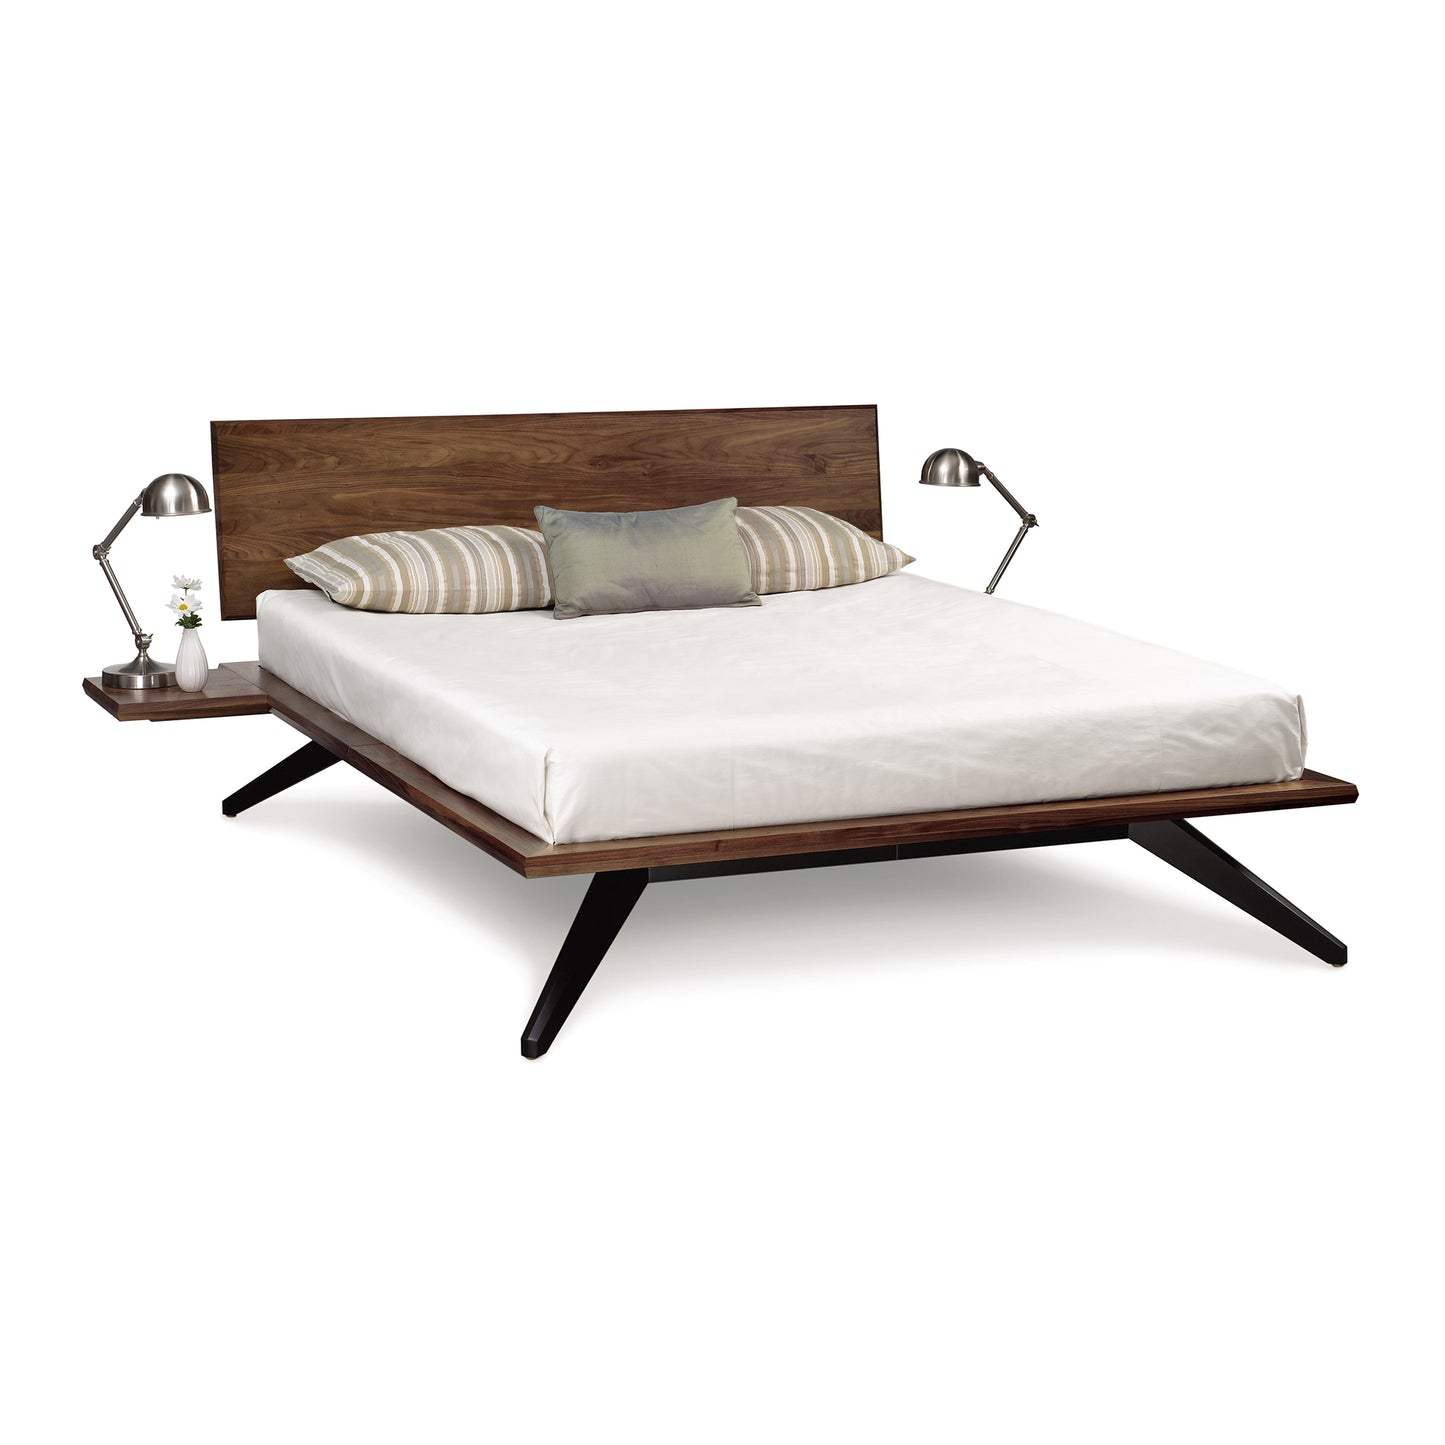 Modern solid walnut wood Astrid platform bed with a white mattress, two striped pillows, and a gray accent pillow, flanked by two identical nightstands with lamps from the Copeland Furniture Astrid Bedroom Furniture Collection, isolated.